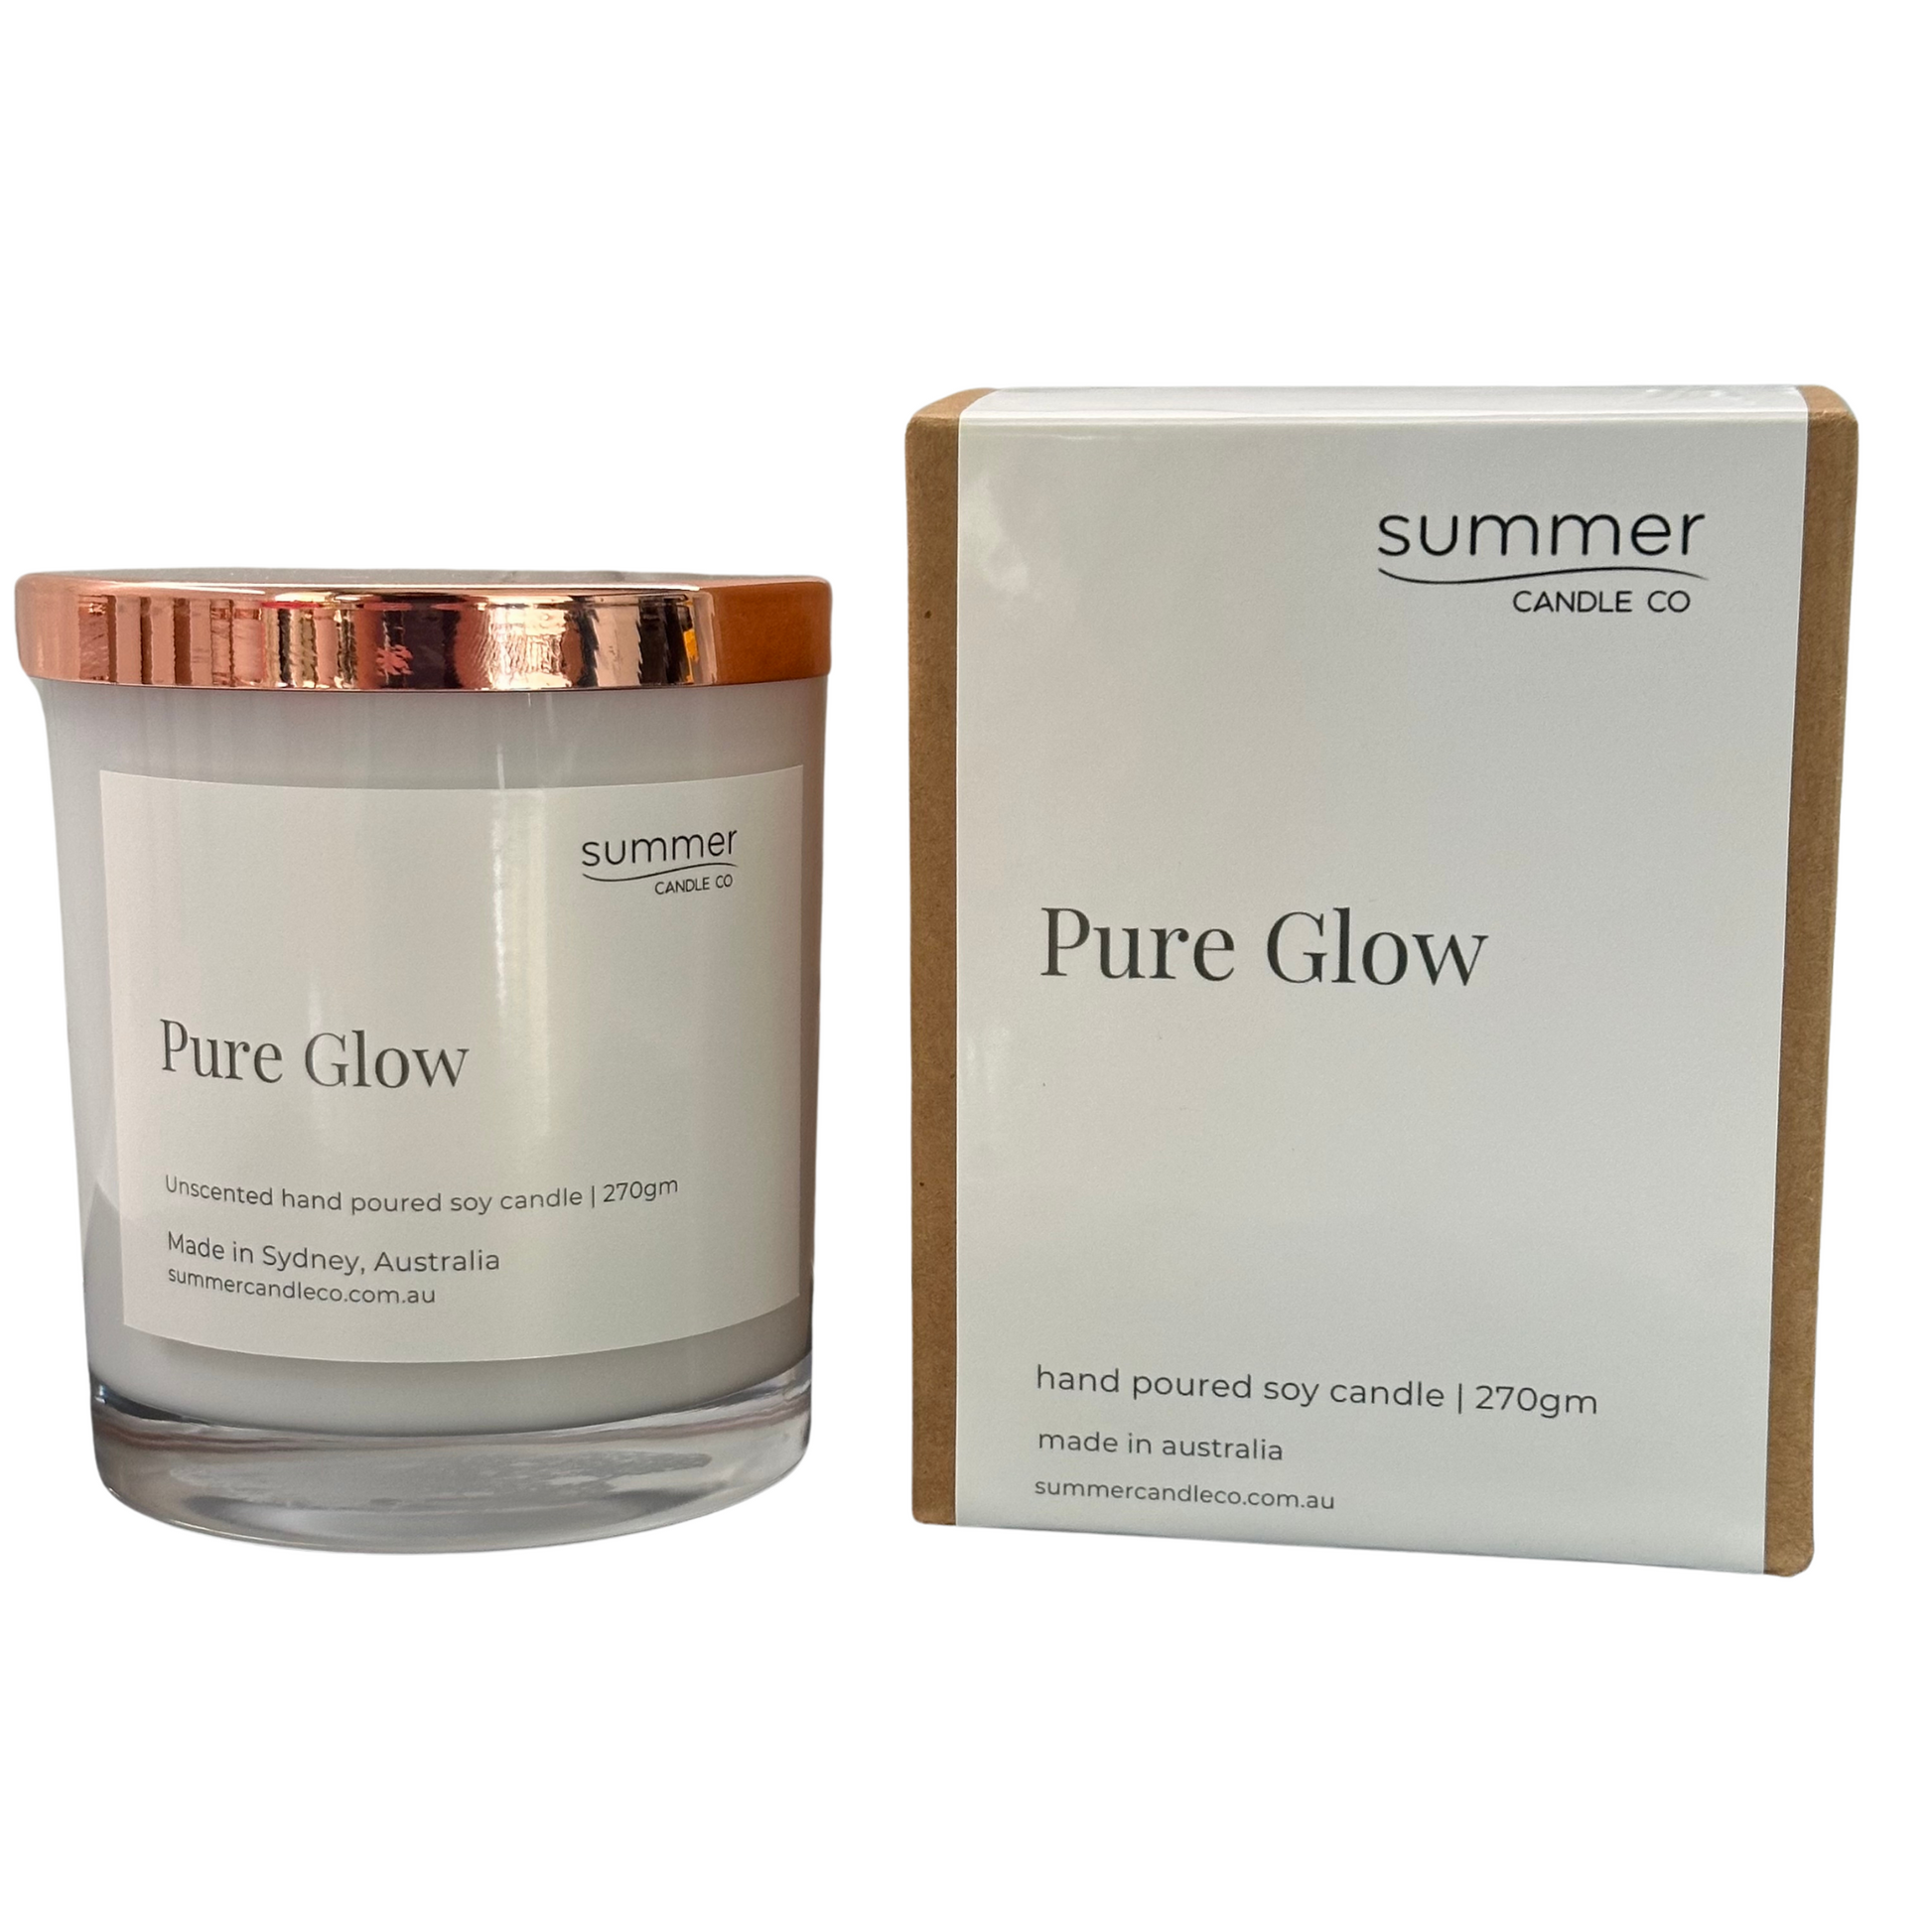 Lovely Hand Poured Soy Candle 270gram No Scented Fragrance called Pure Glow with Gift Box